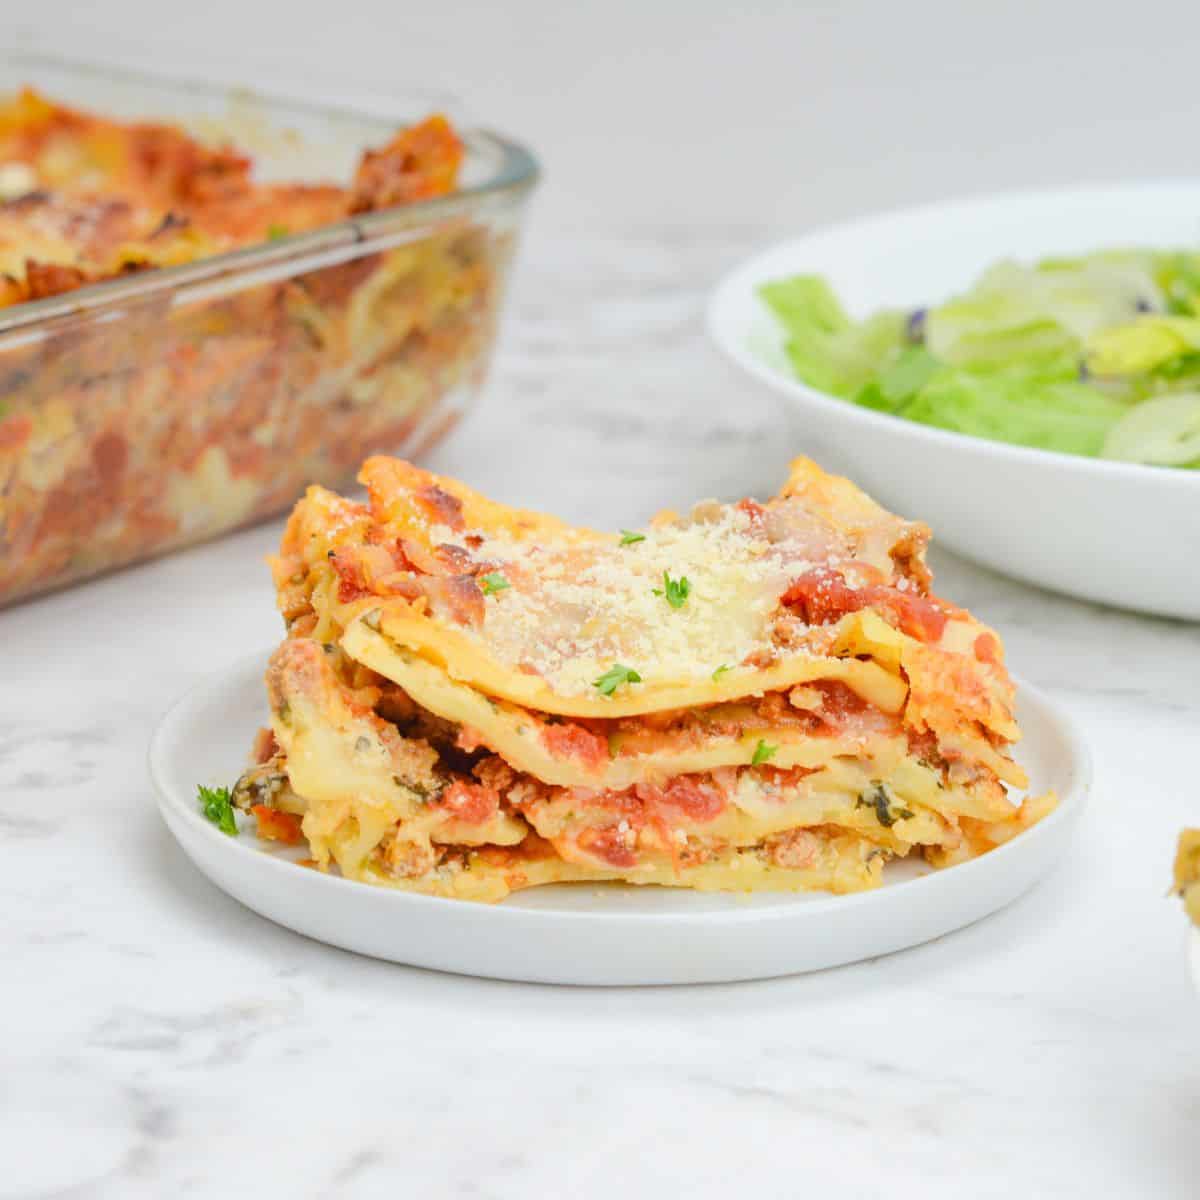 A single serving of baked lasagna sits on a white plate. A bowl of salad sits to the right and the casserole dish to the left.